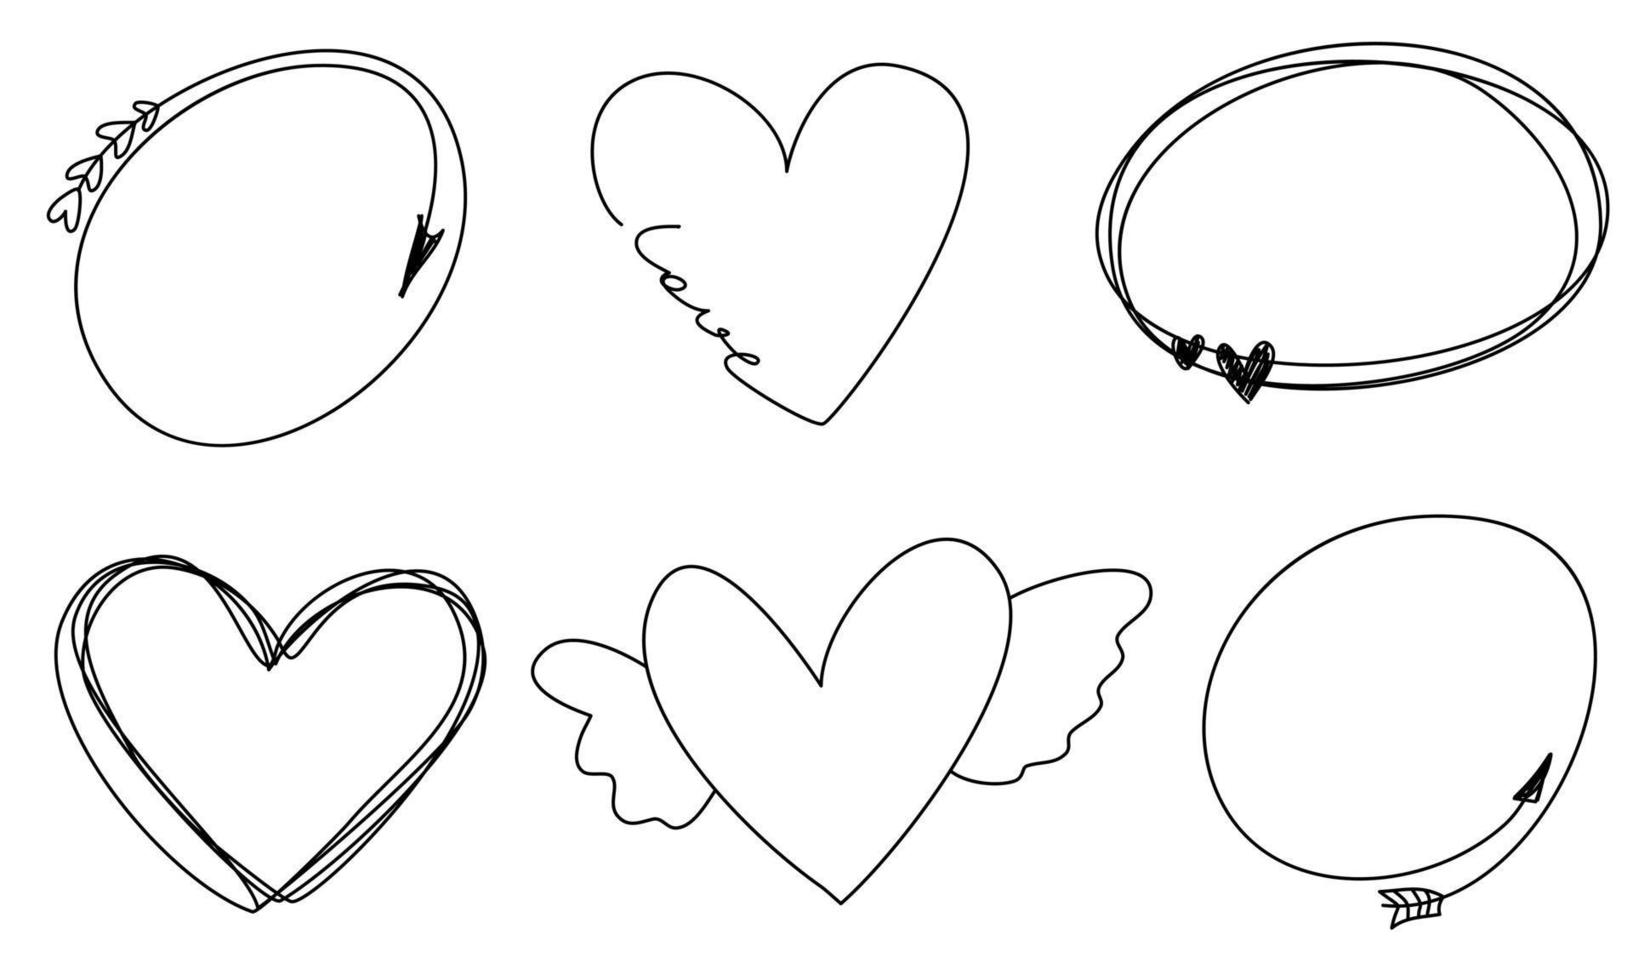 Cute doodle hearts frames with love arrows for a wedding invitation. Line vector illustrations hand drawn collection.